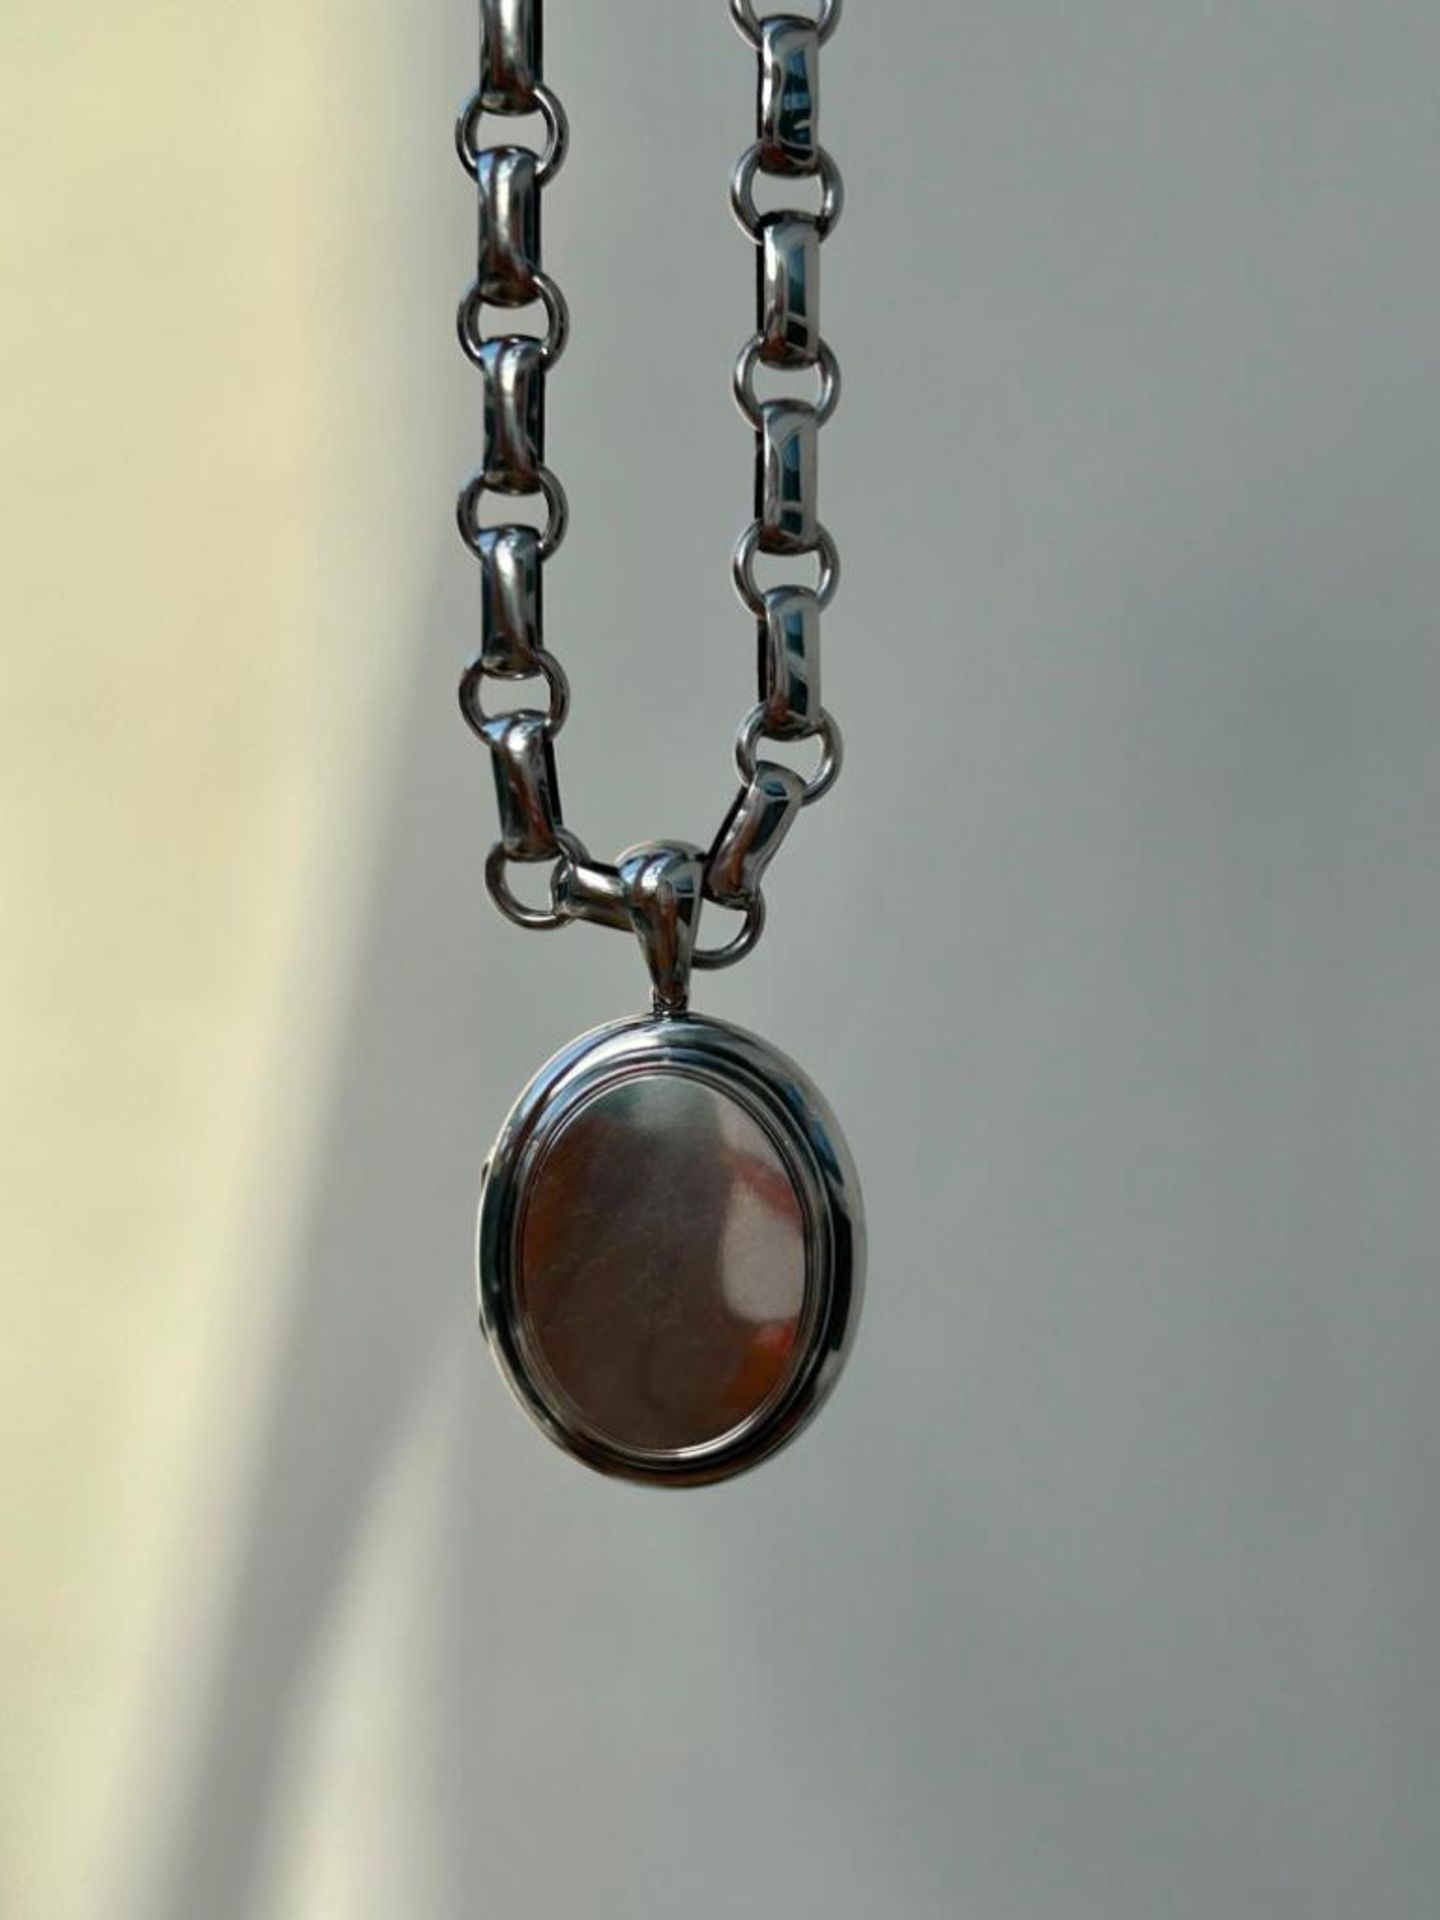 Antique Bookchain and Locket Pendant in Silver - Image 4 of 7